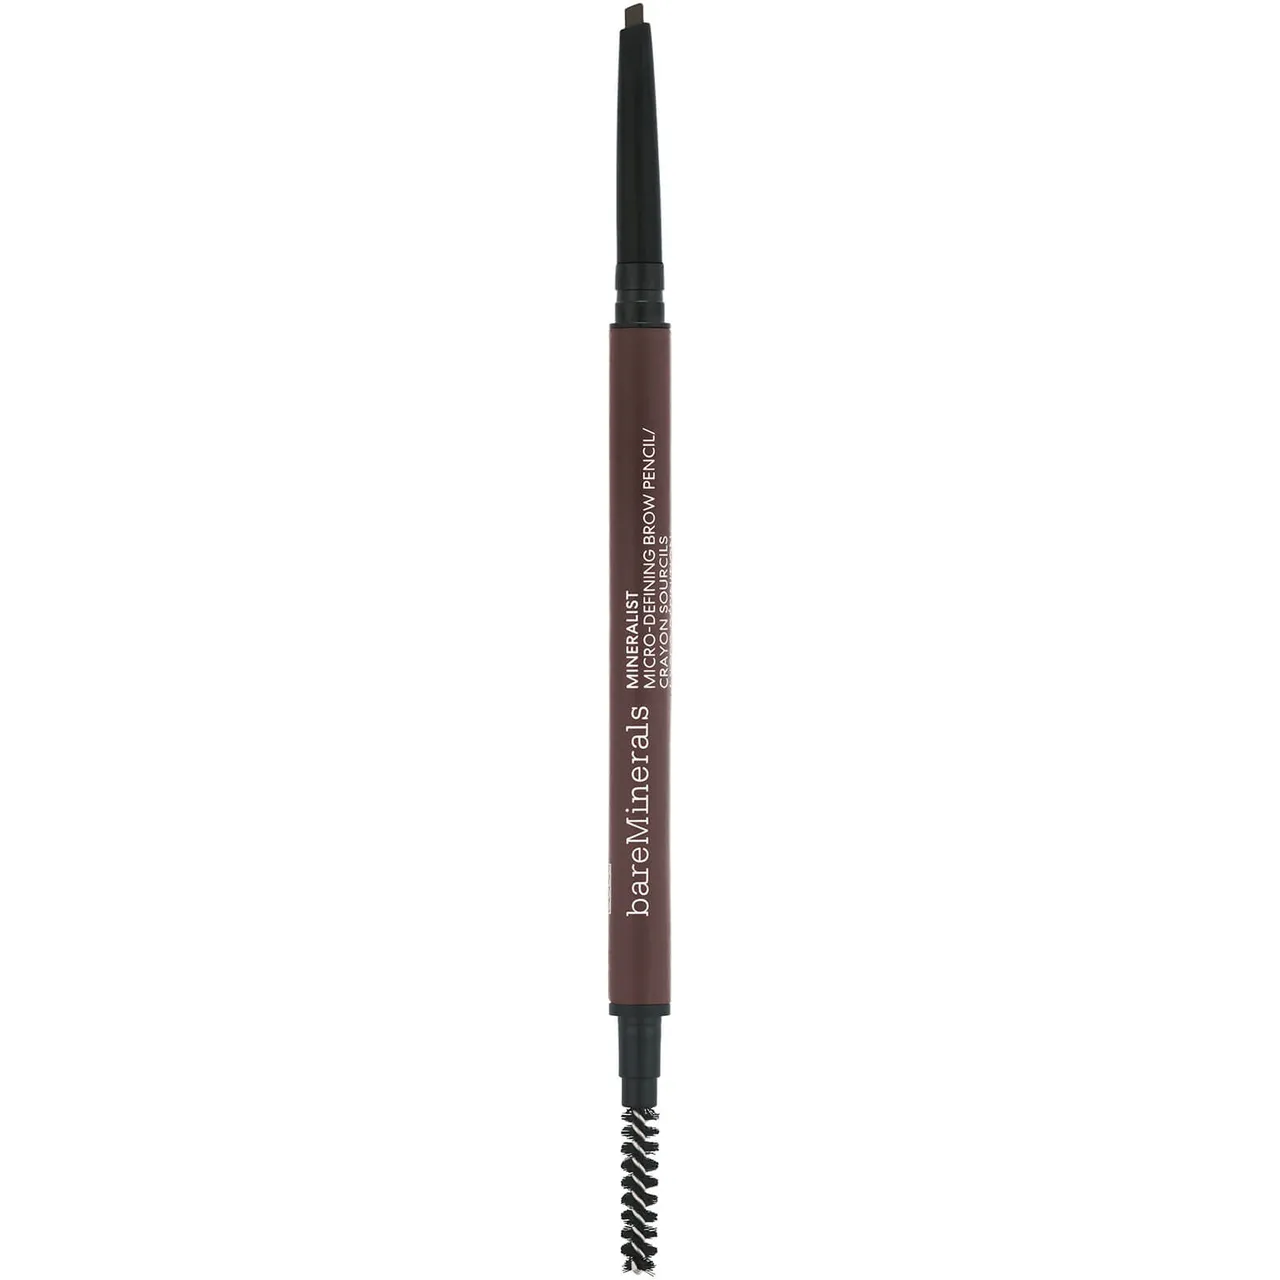 bareMinerals Mineralist MicroDefining Brow Pencil 0.08g (Various Shades) - Coffee